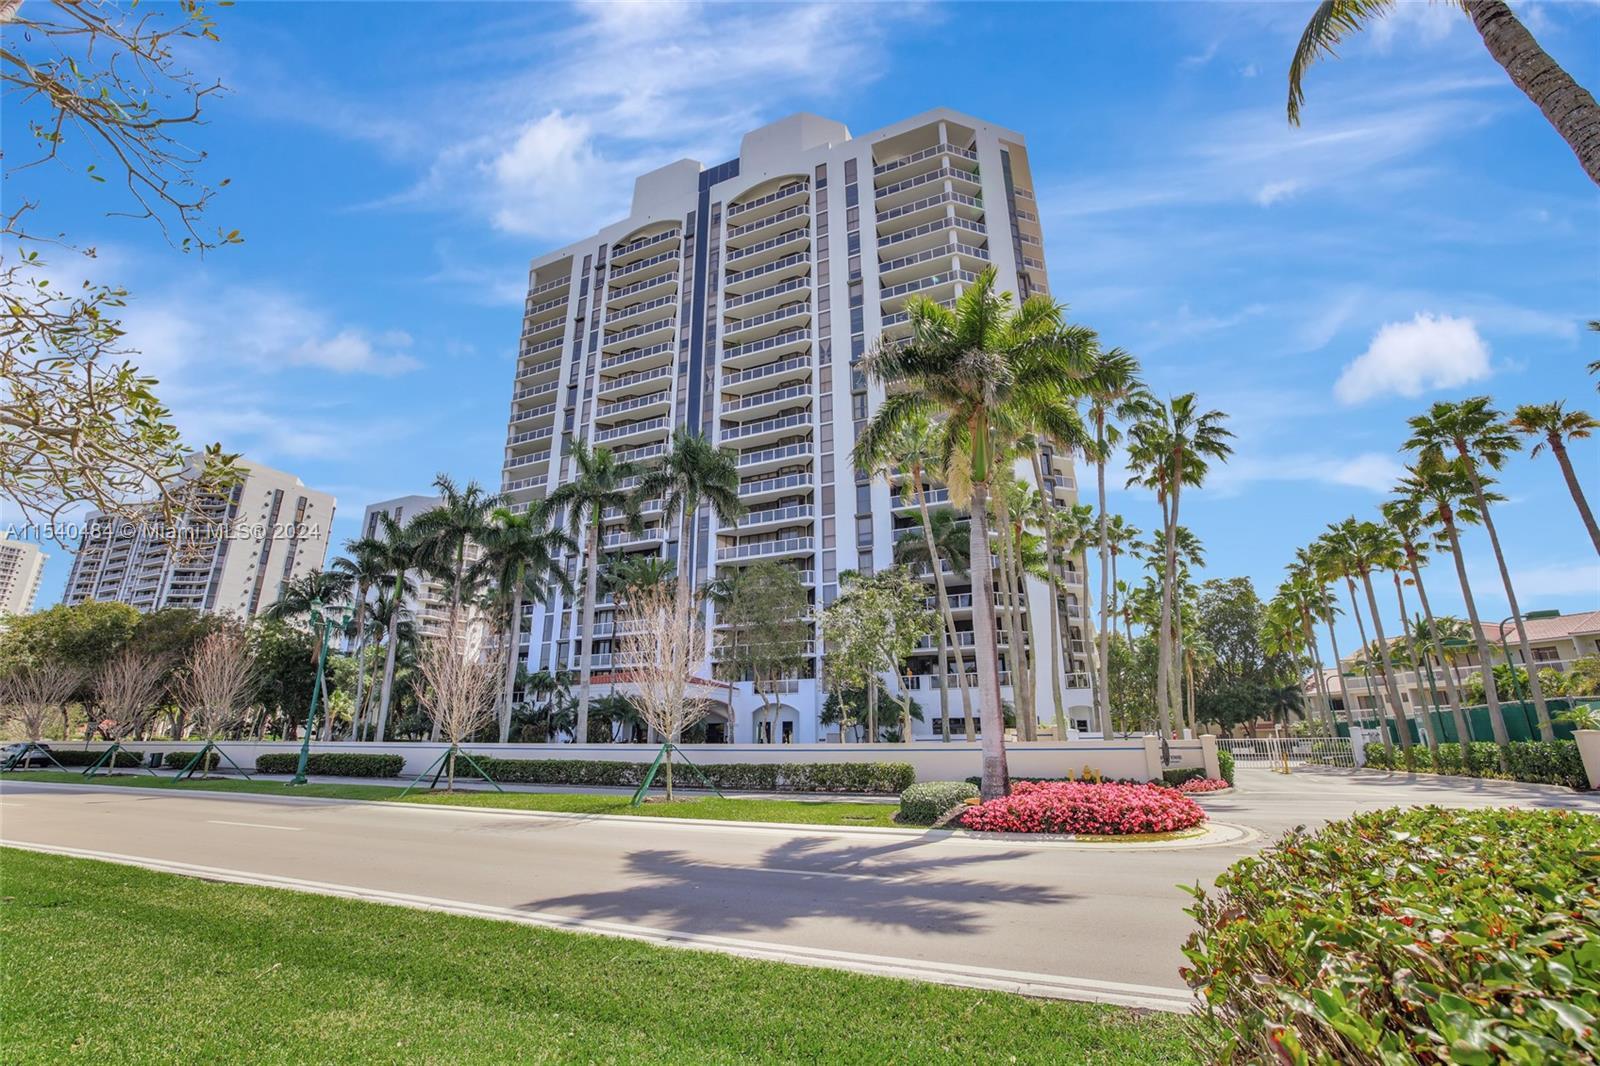 Live at the highly desirable Harbor Towers!This residence has 3 beds, 2 baths. Den can be closed to 